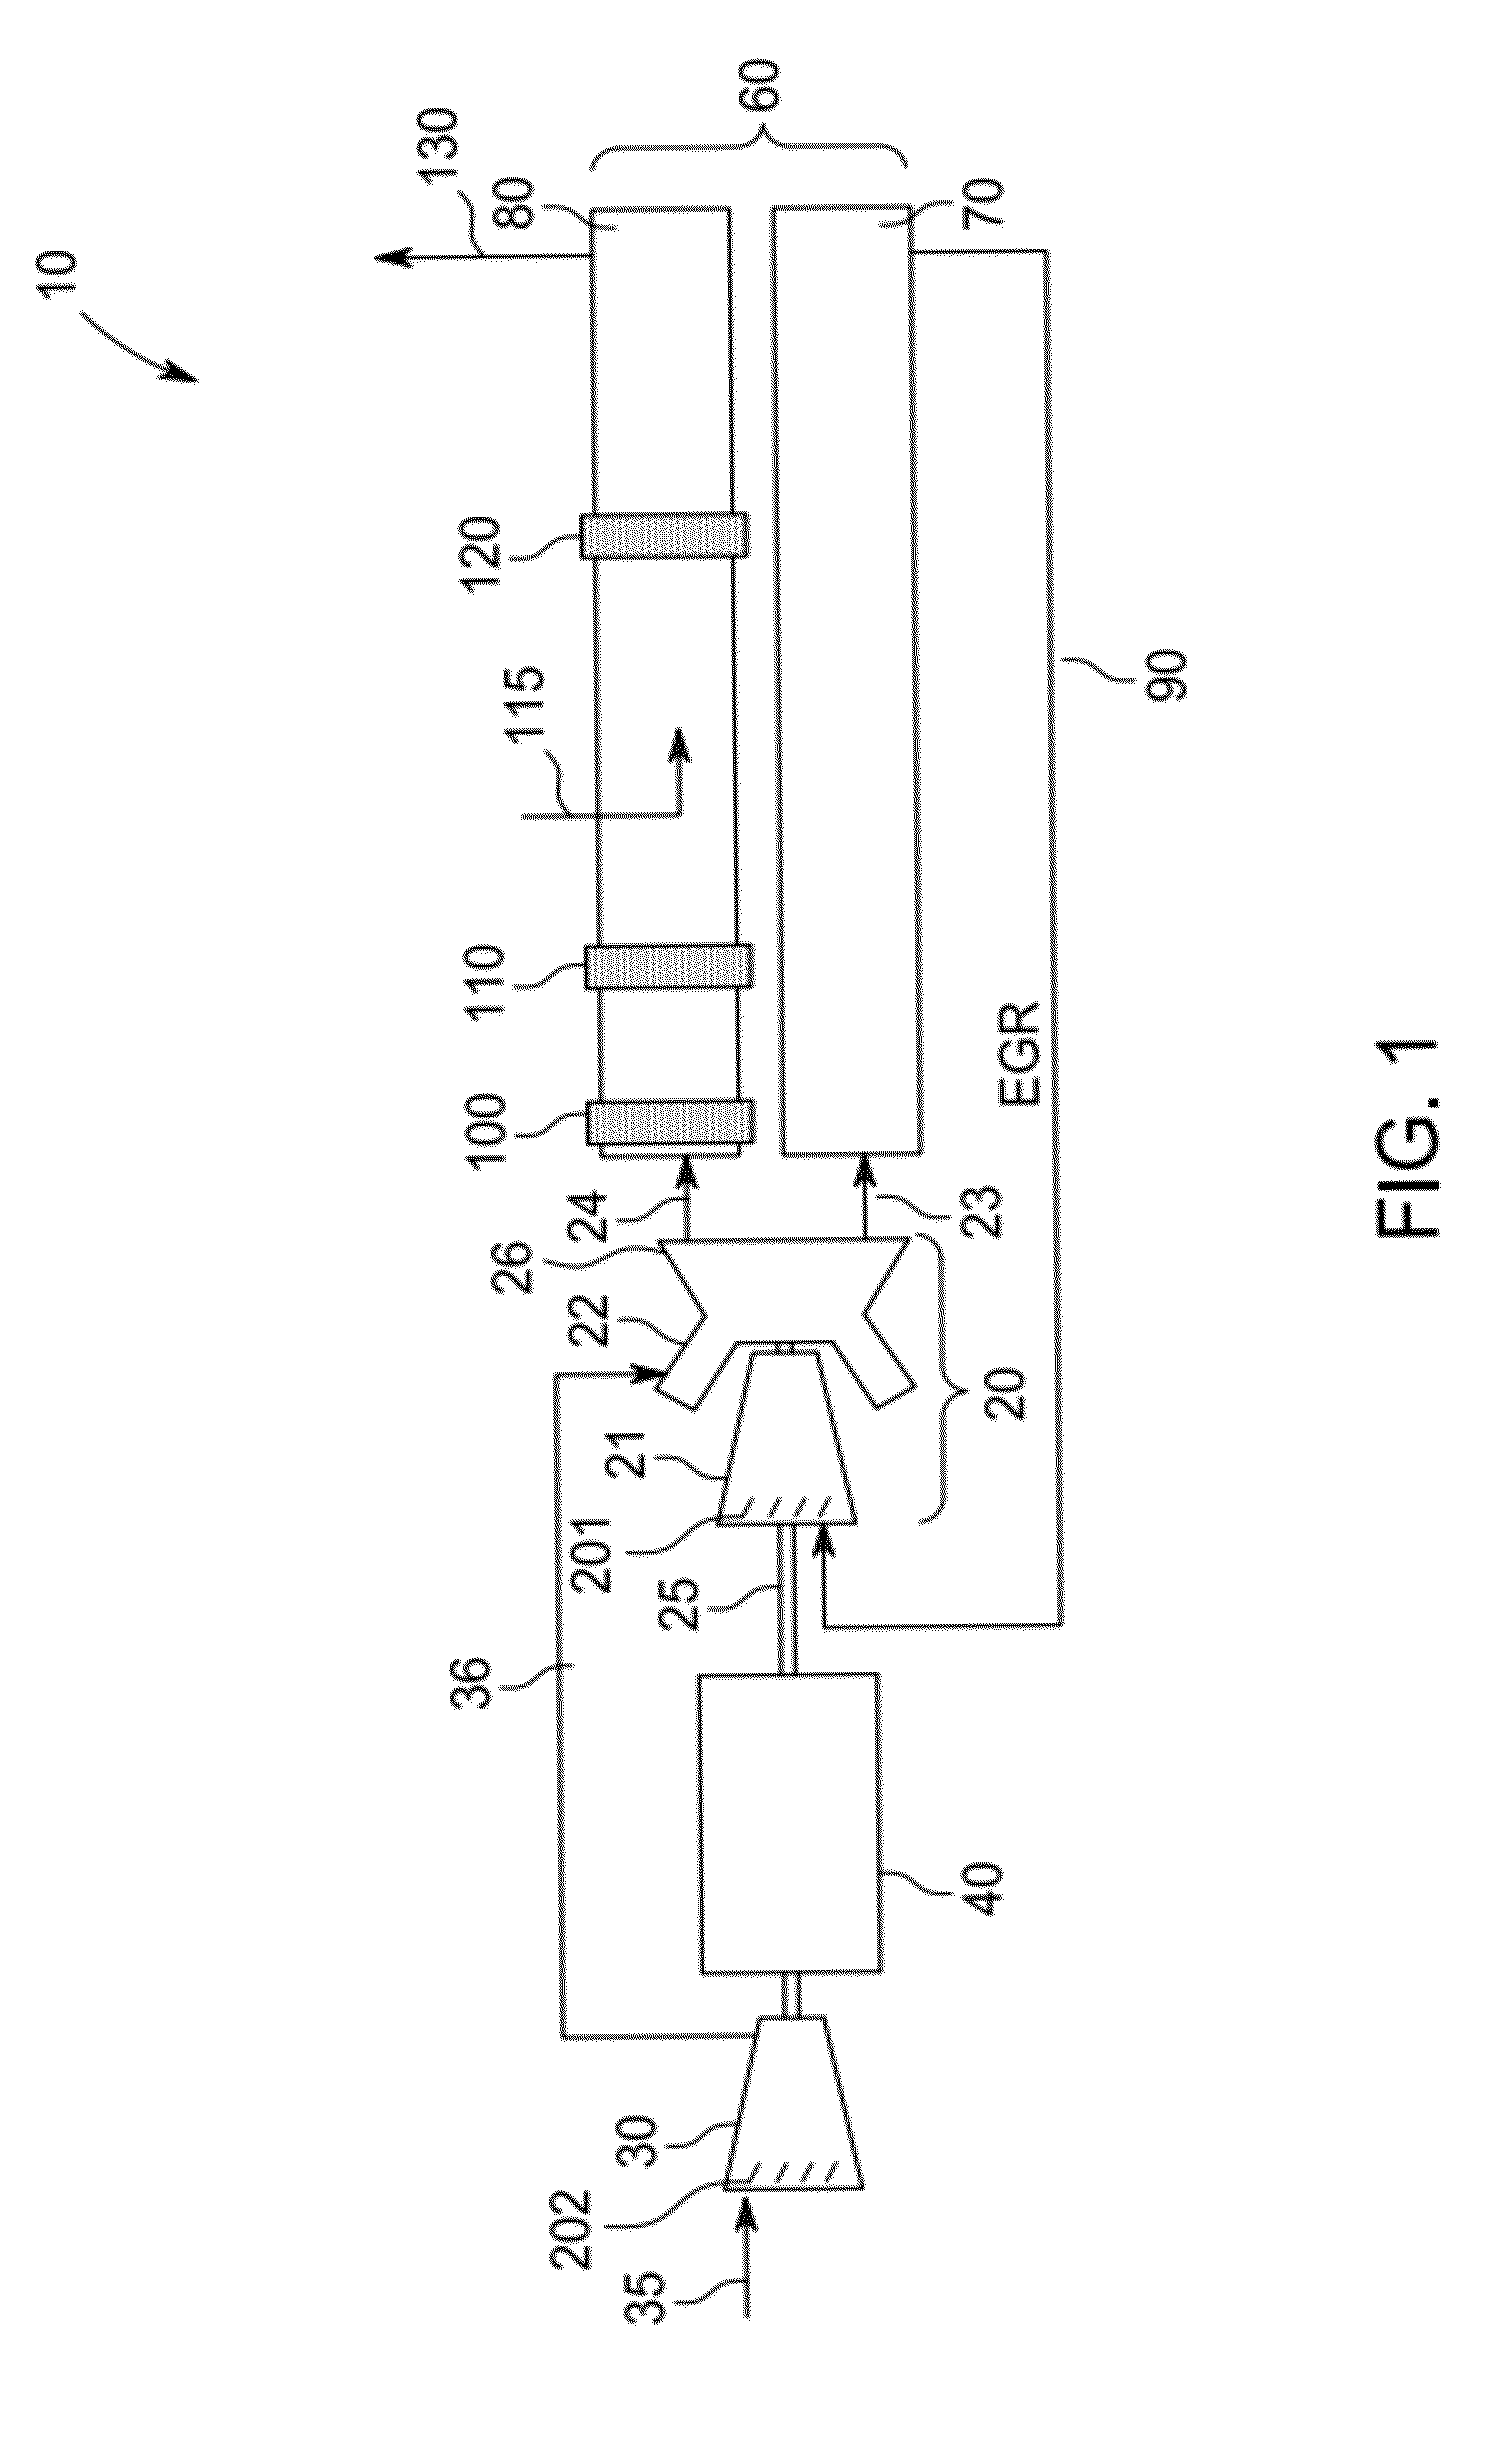 System and method to generate electricity